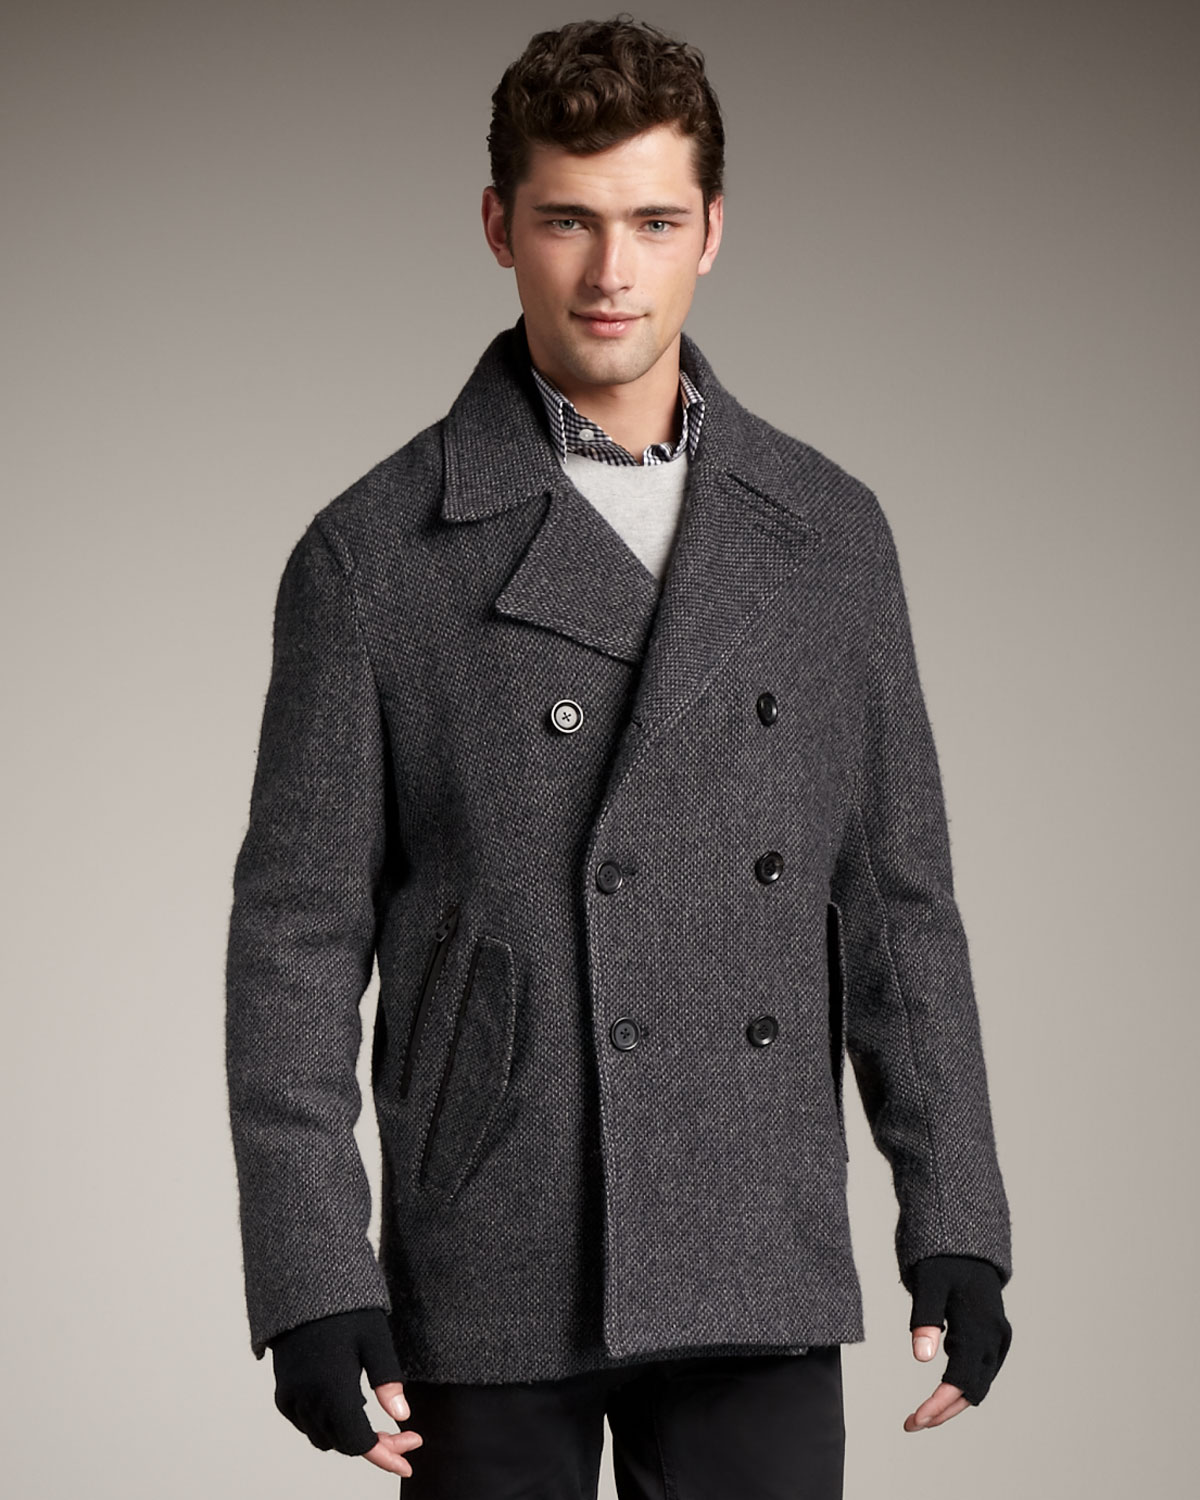 Theory Wool Pea Coat in Charcoal (Gray) for Men - Lyst